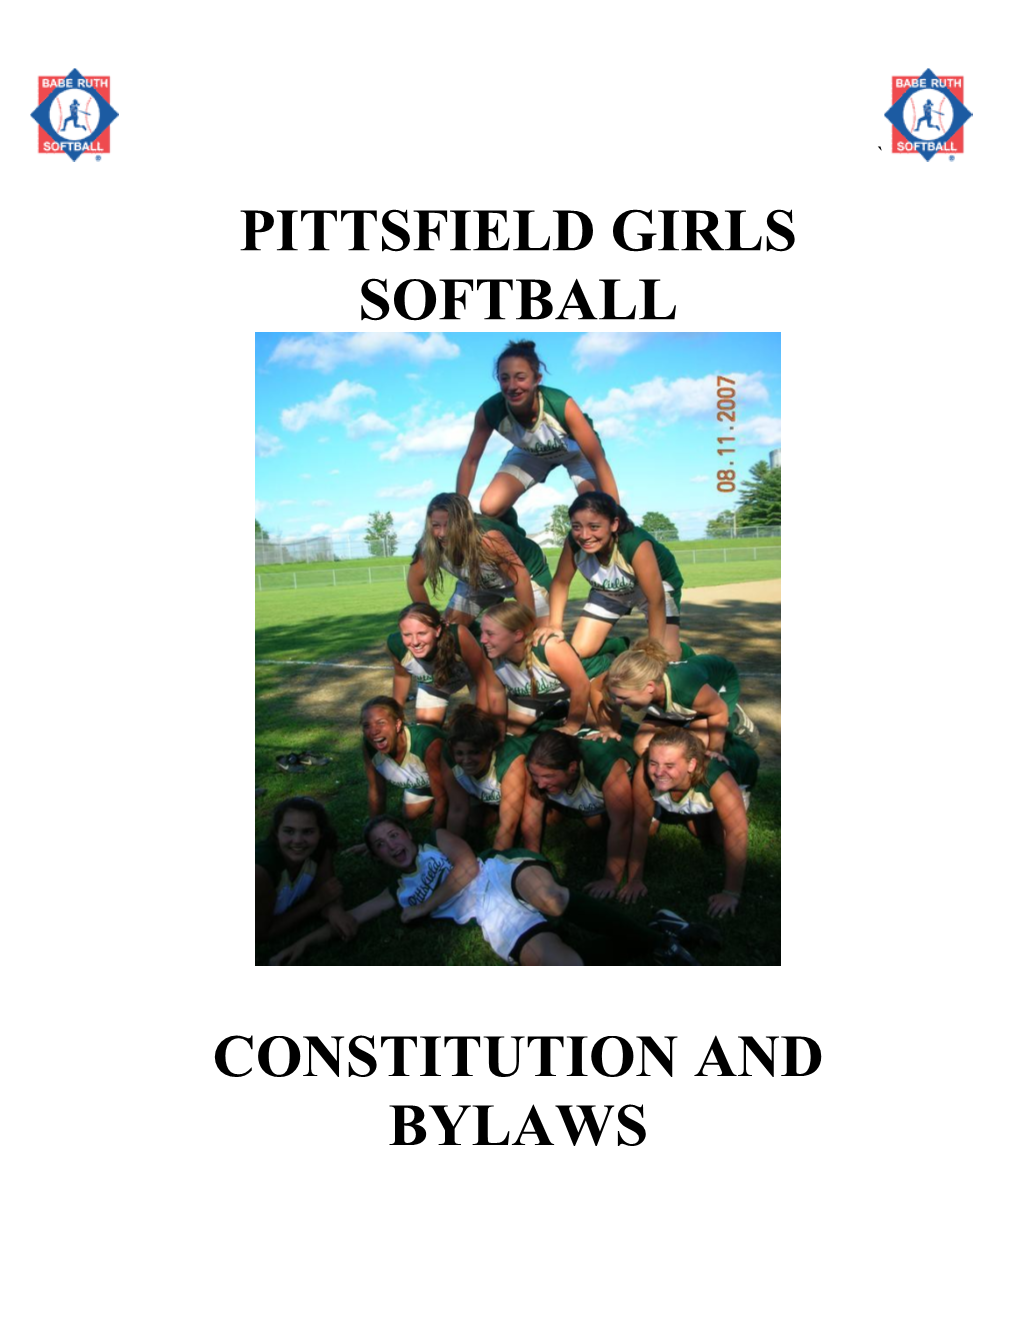 This Organization Shall Be Known As the North, South, and West Little League of Pittsfield